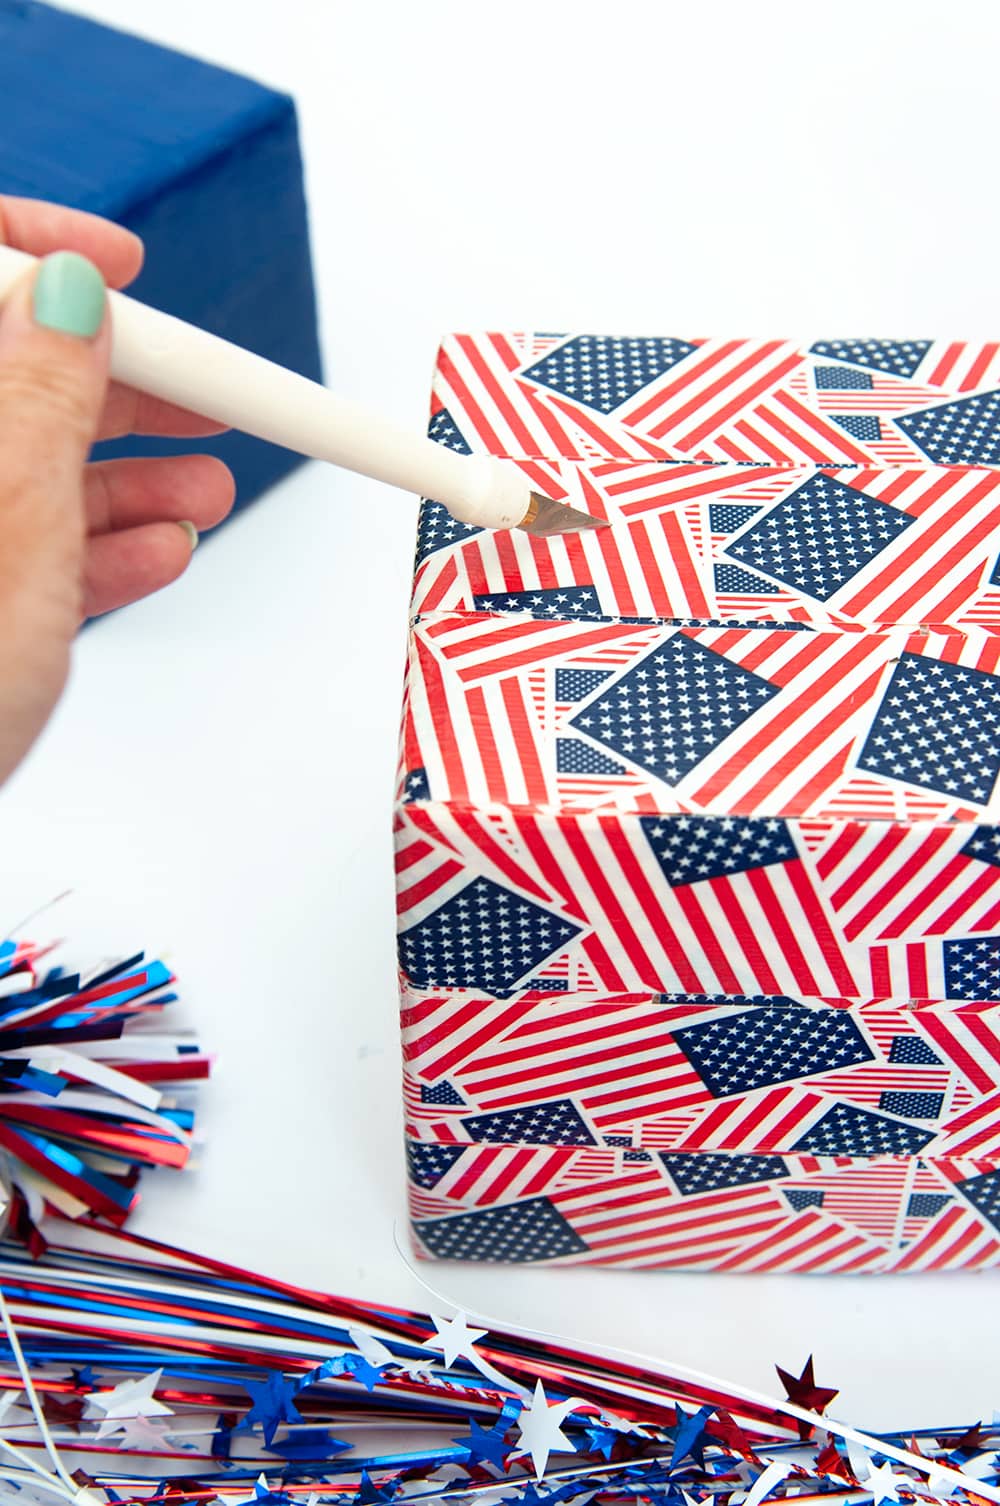 July 4th Tabletop Decor with Duck Tape®